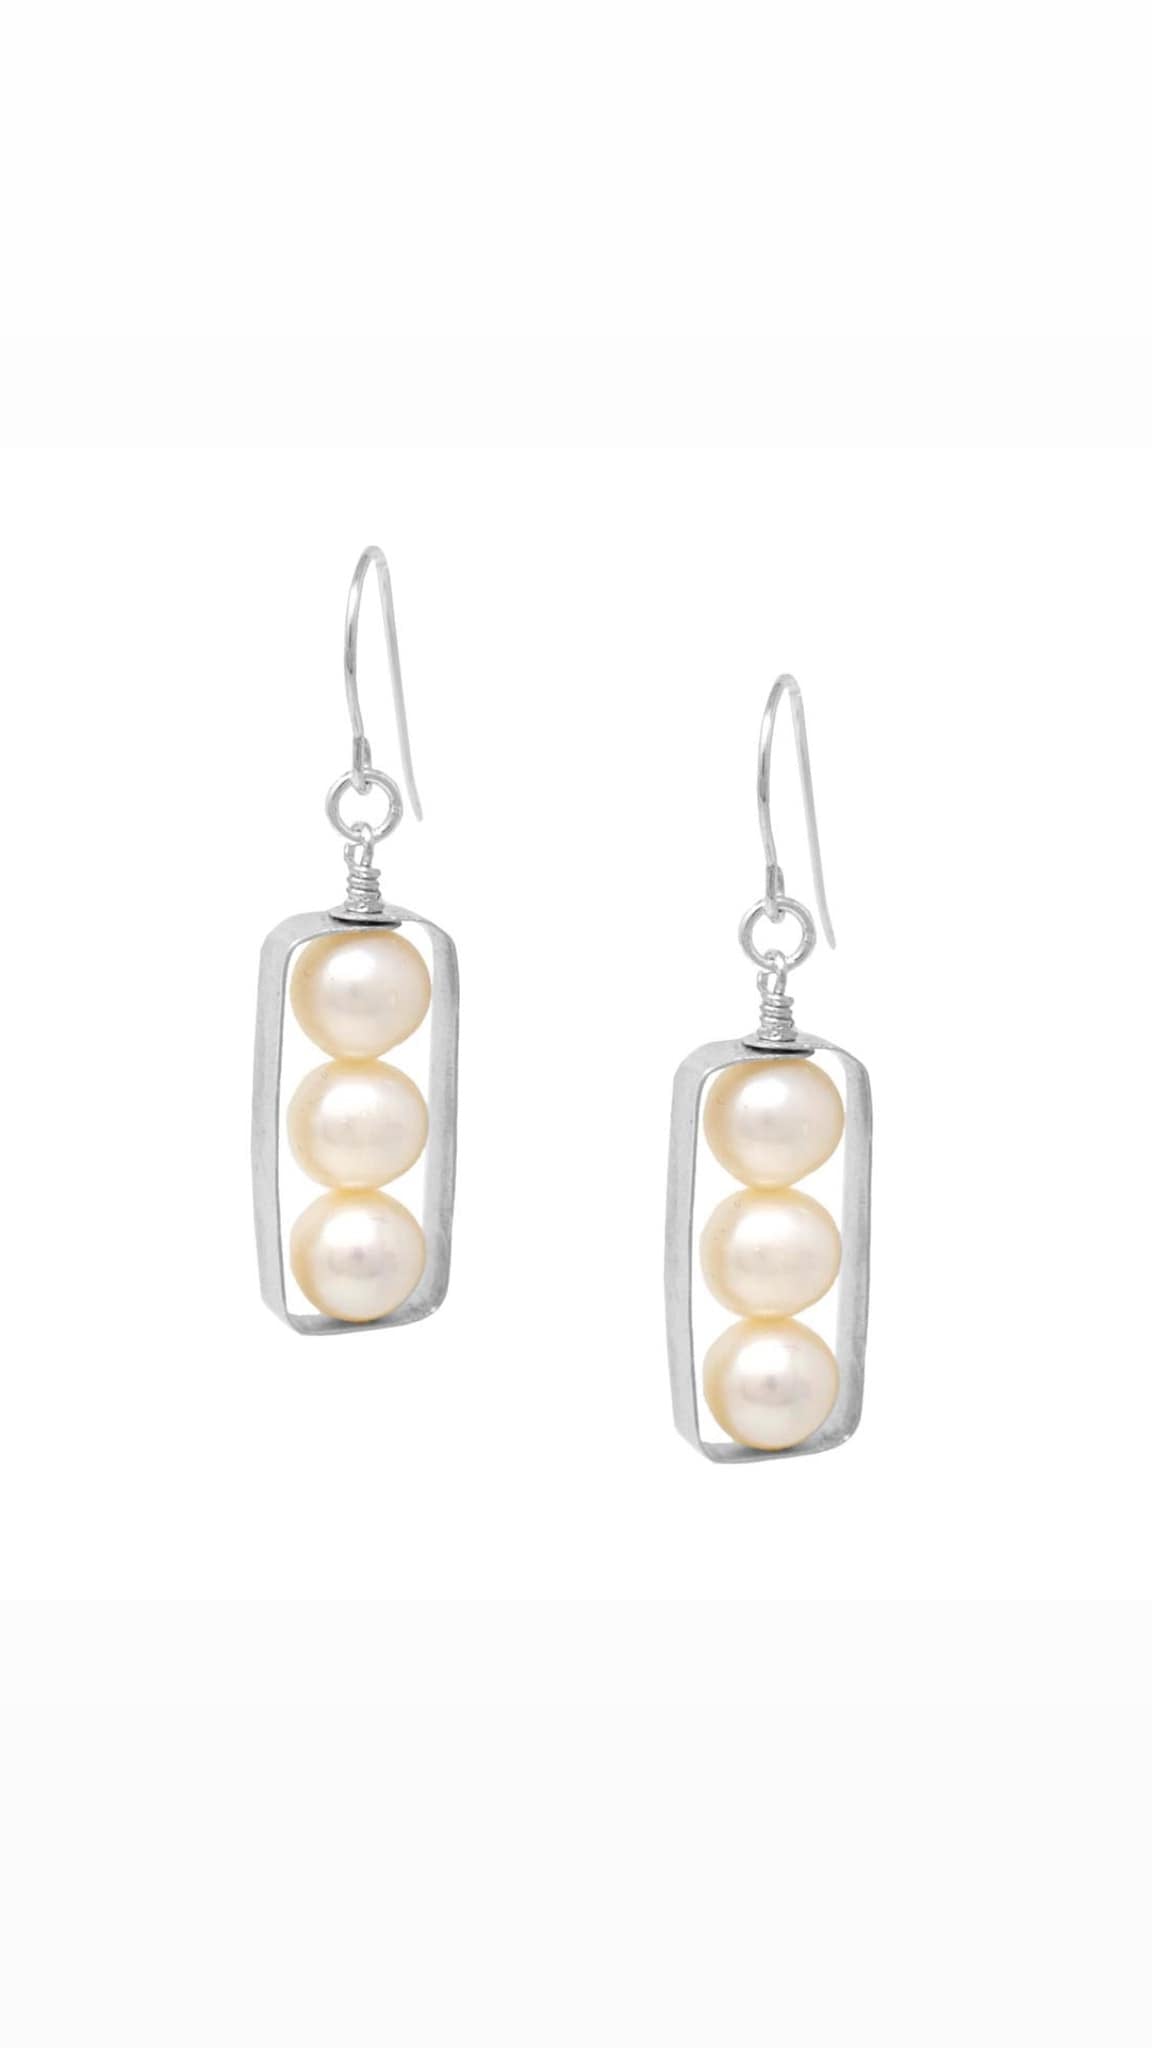 E375  Pearl Rectangle With Silver Wire Earrings by Silvana Segulja